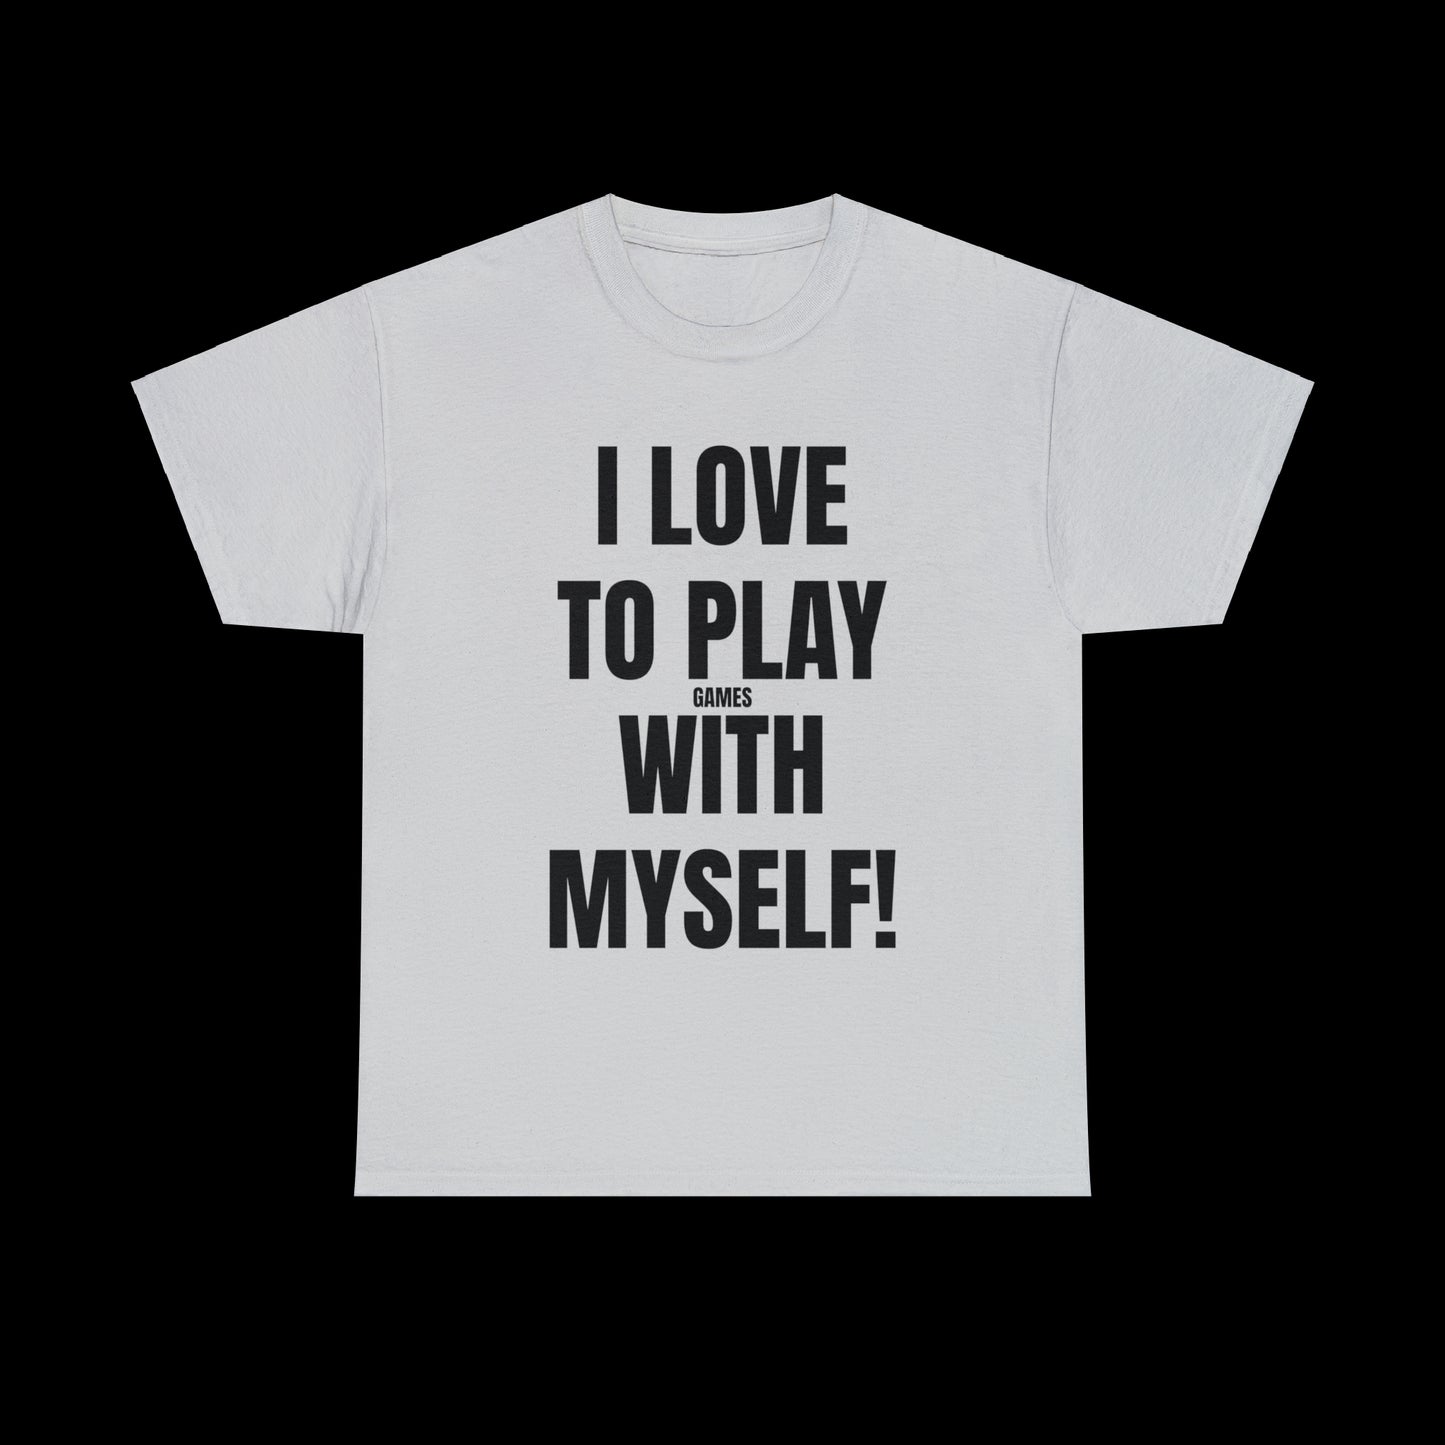 I Love To Play Games With Myself T-Shirt